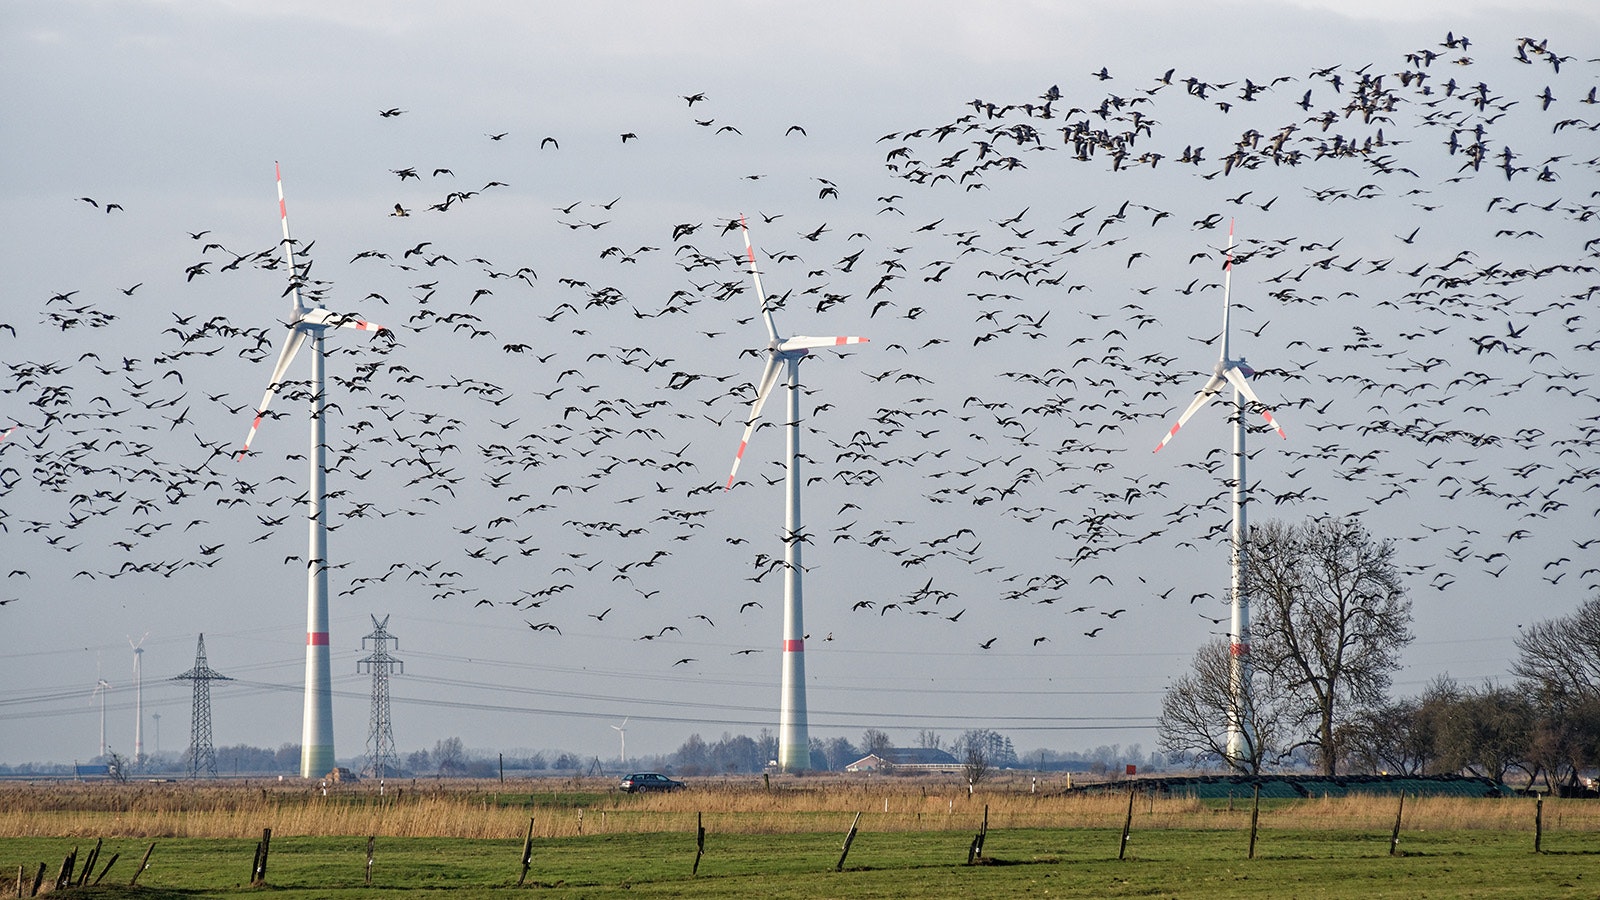 Birds killed by wind turbines can become more of a problem as more wind farms are built.